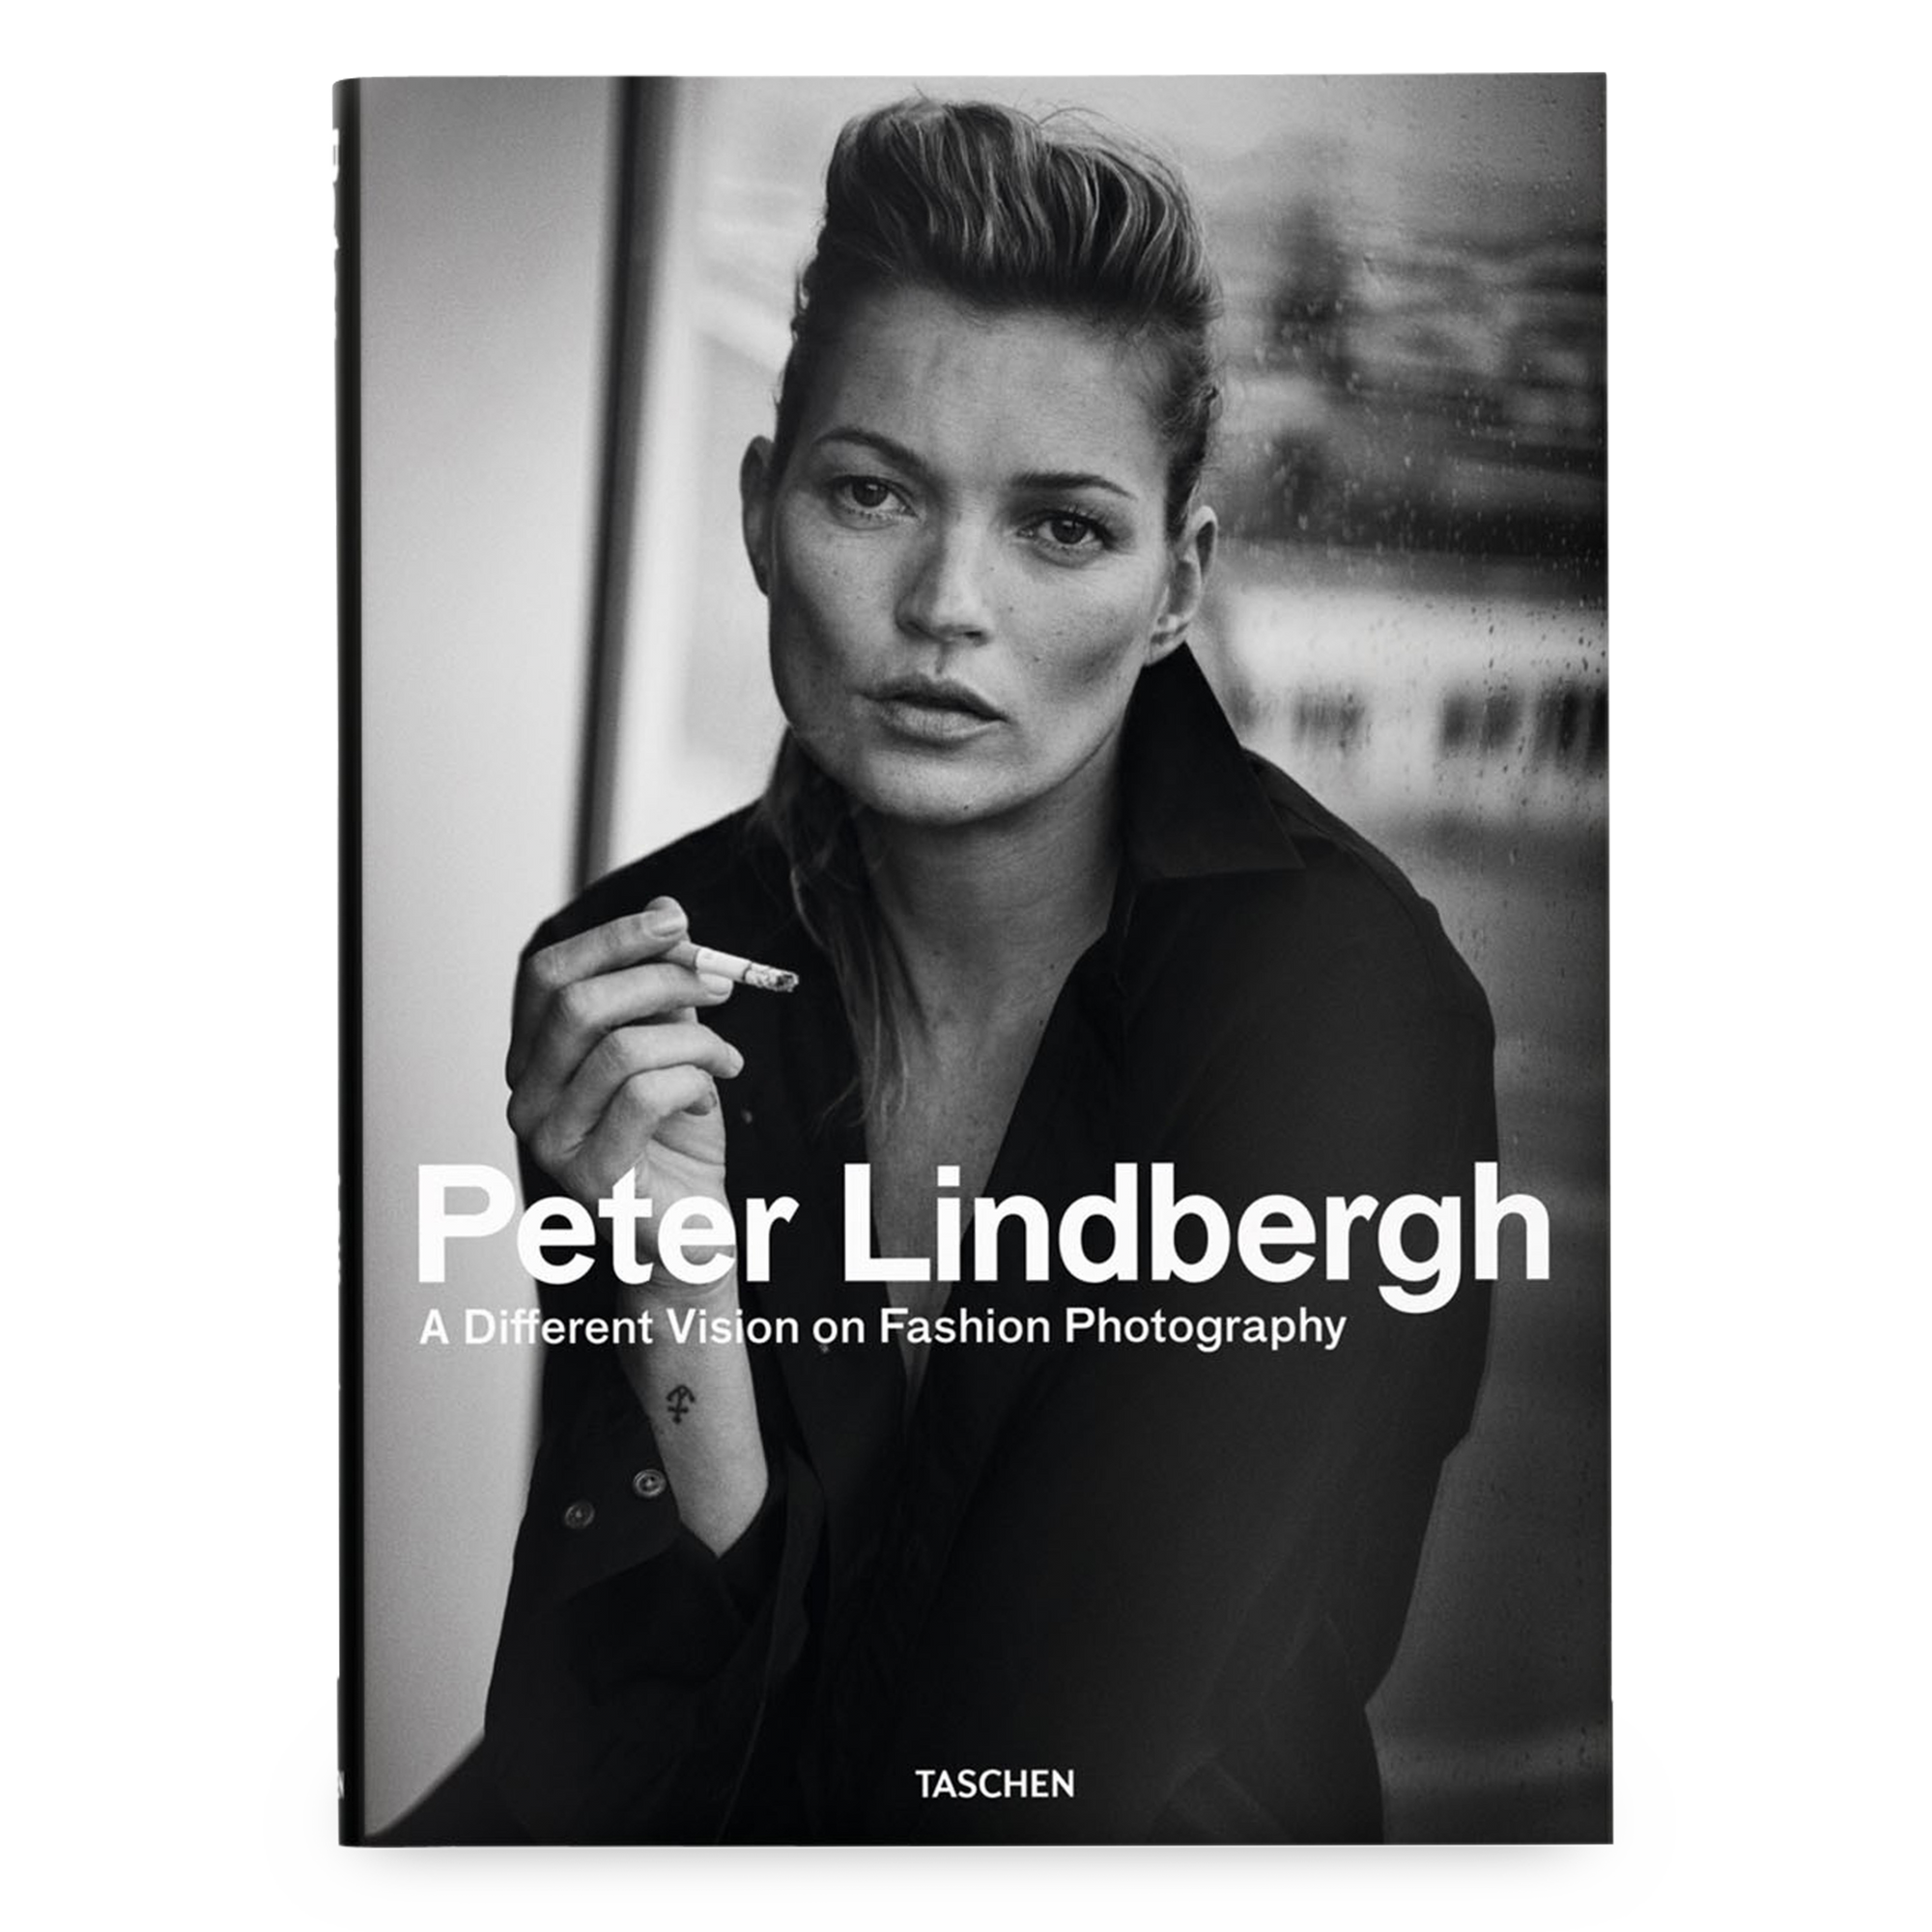 When German photographer Peter Lindbergh shot five young models in downtown New York City in 1989, he produced not only the iconic British Vogue January 1990 cover but also the bir